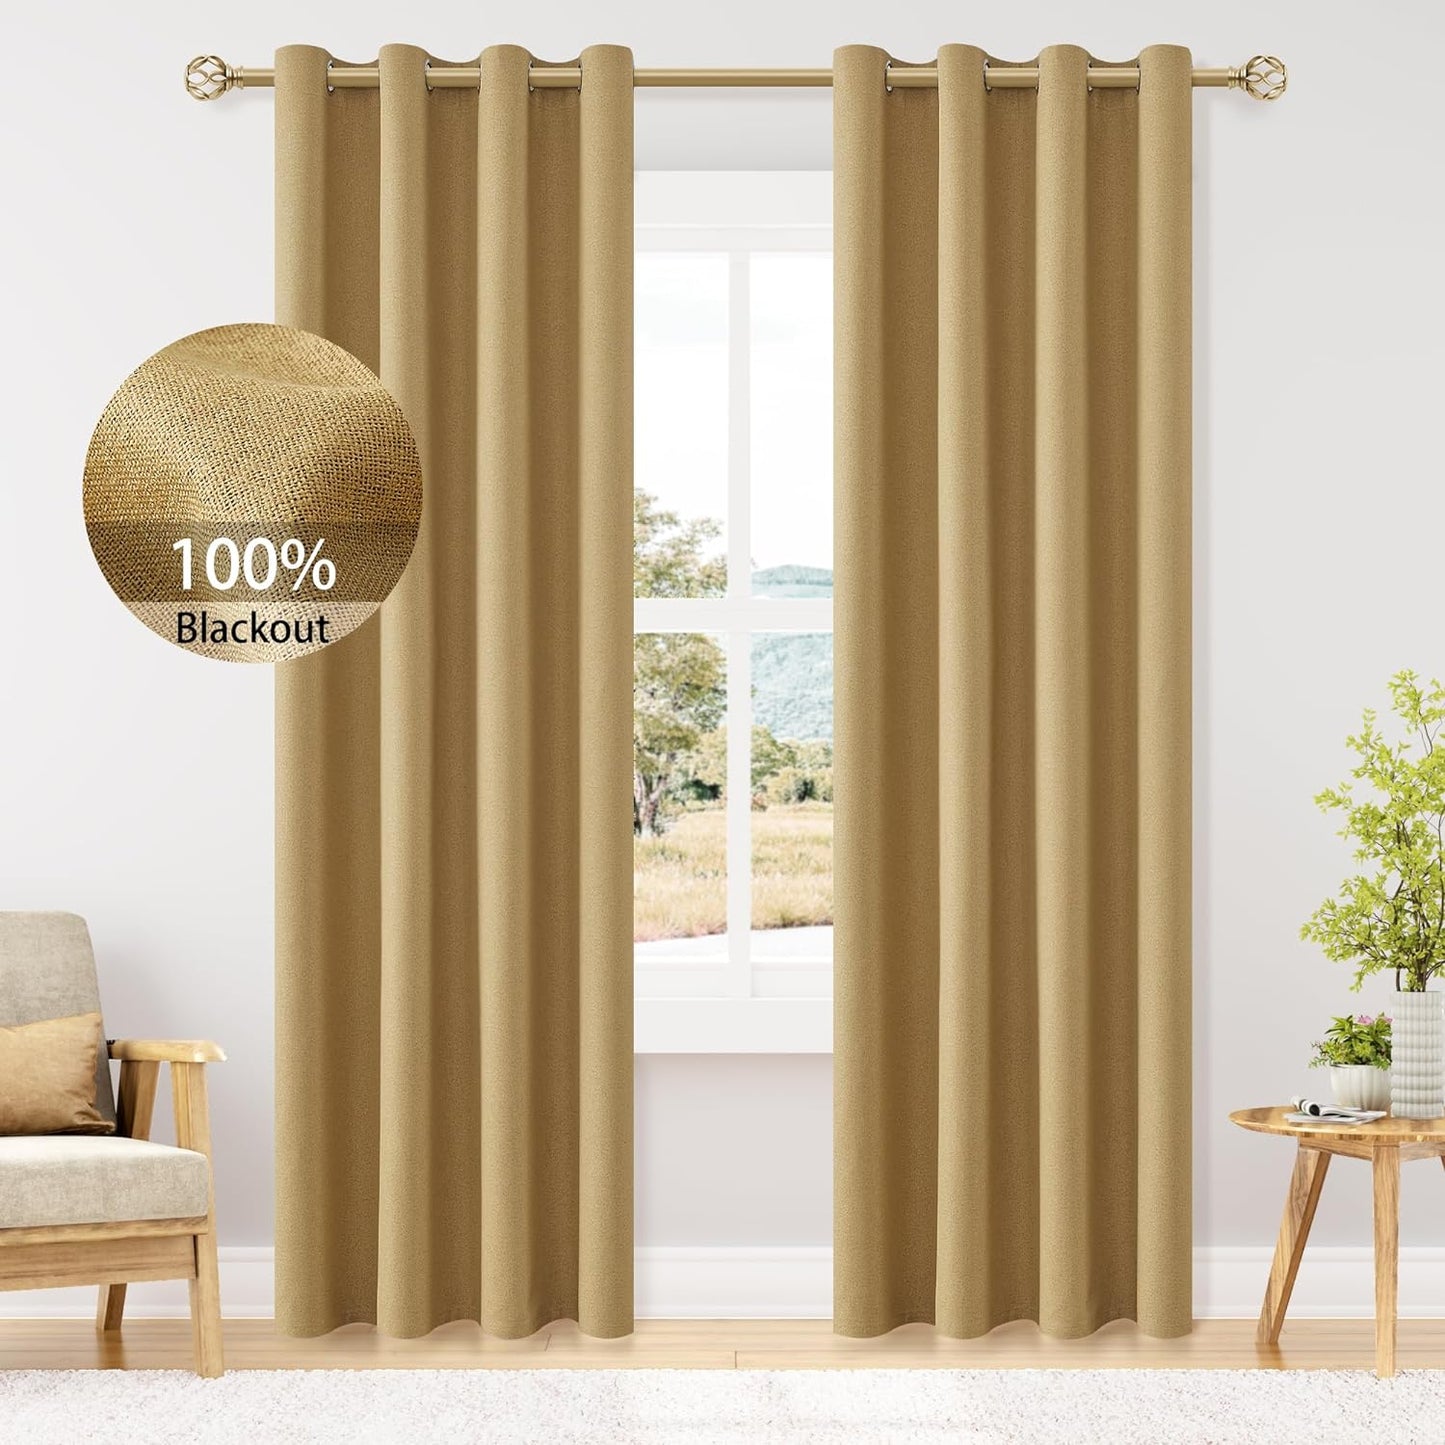 Full Blackout Curtains 84 Inches Long for Bedroom, Neutral Flax Linen Black Out Drapes, 2 Panels Grommet Room Darkening Curtains 84 Inch Length with Backing for Living Room Light Beige 52X84  ChrisDowa Mustard Yellow 52W X 84L 